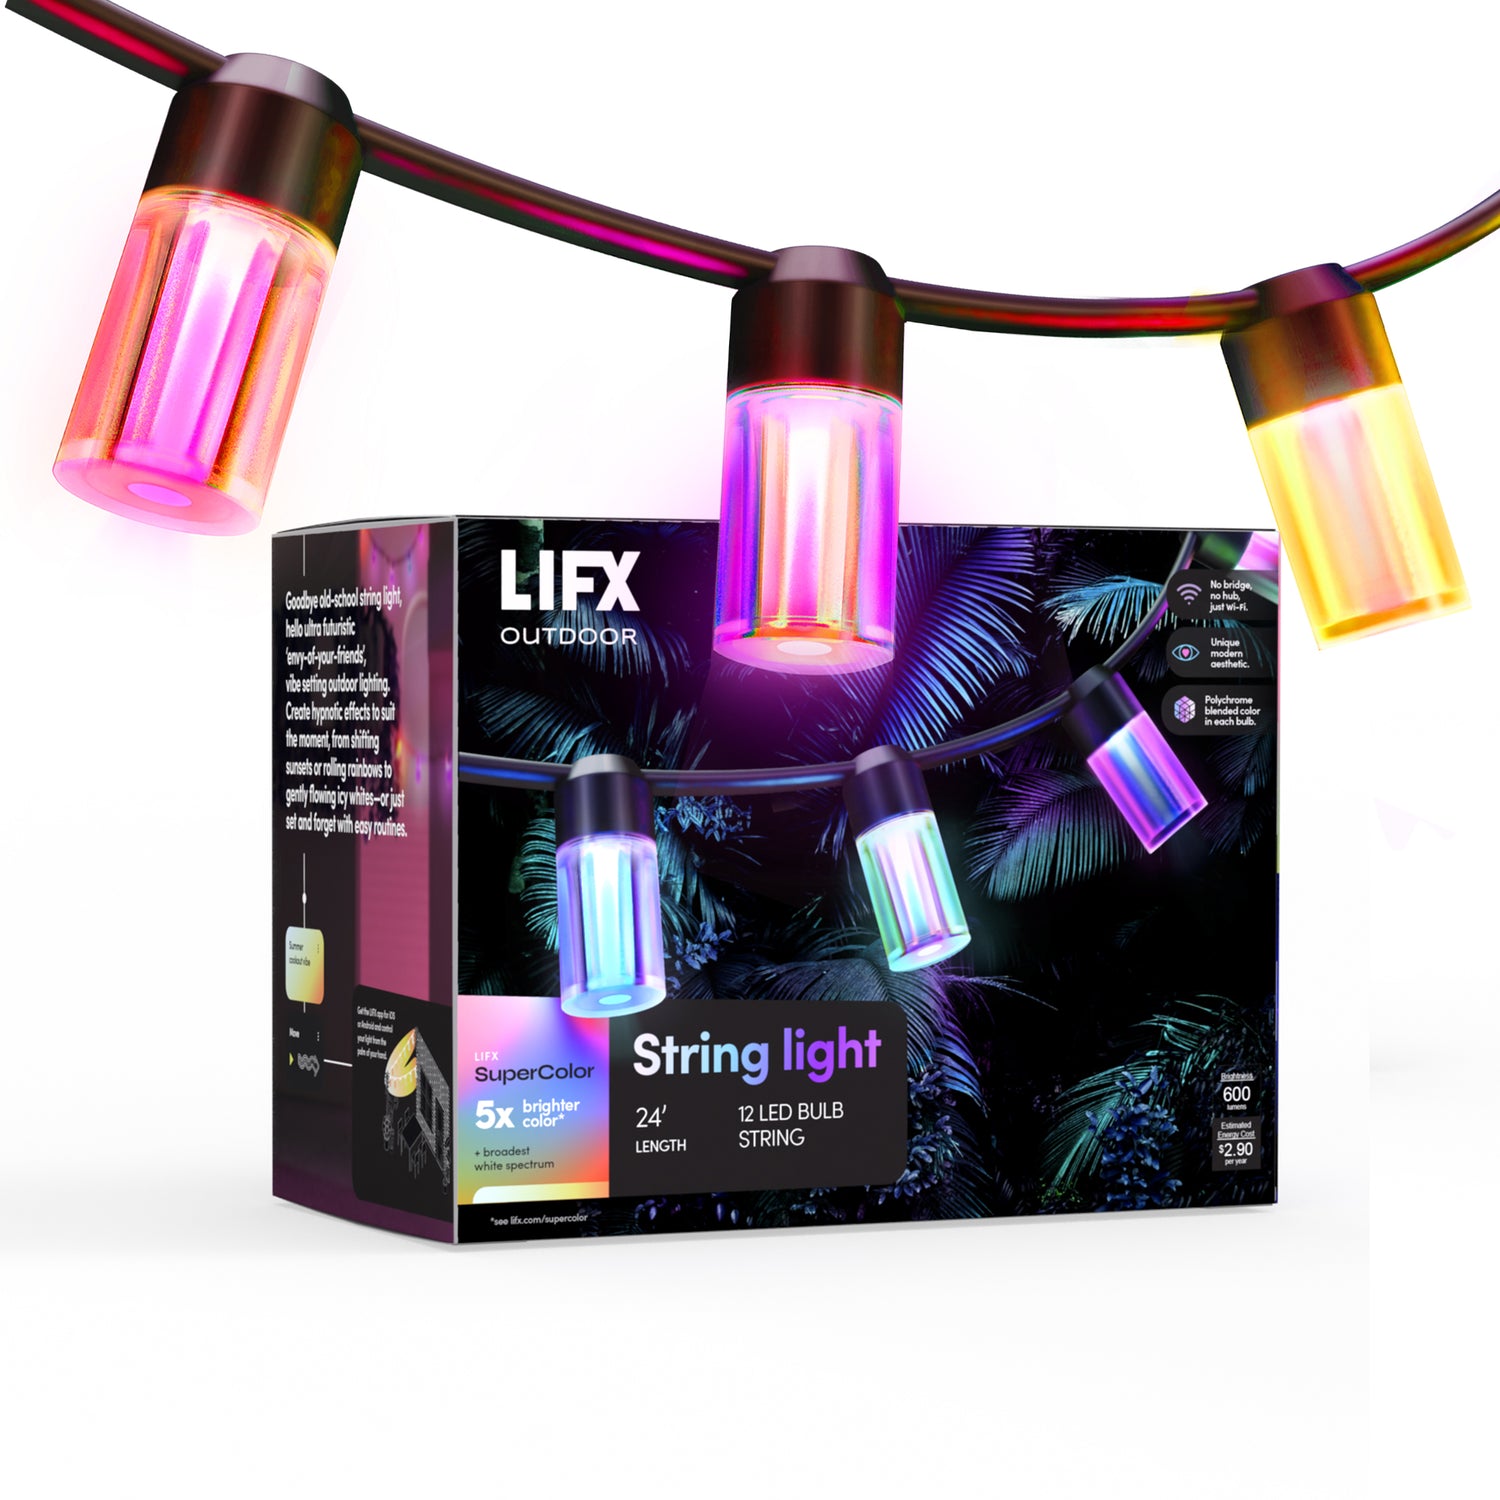 LIFX Product Collection